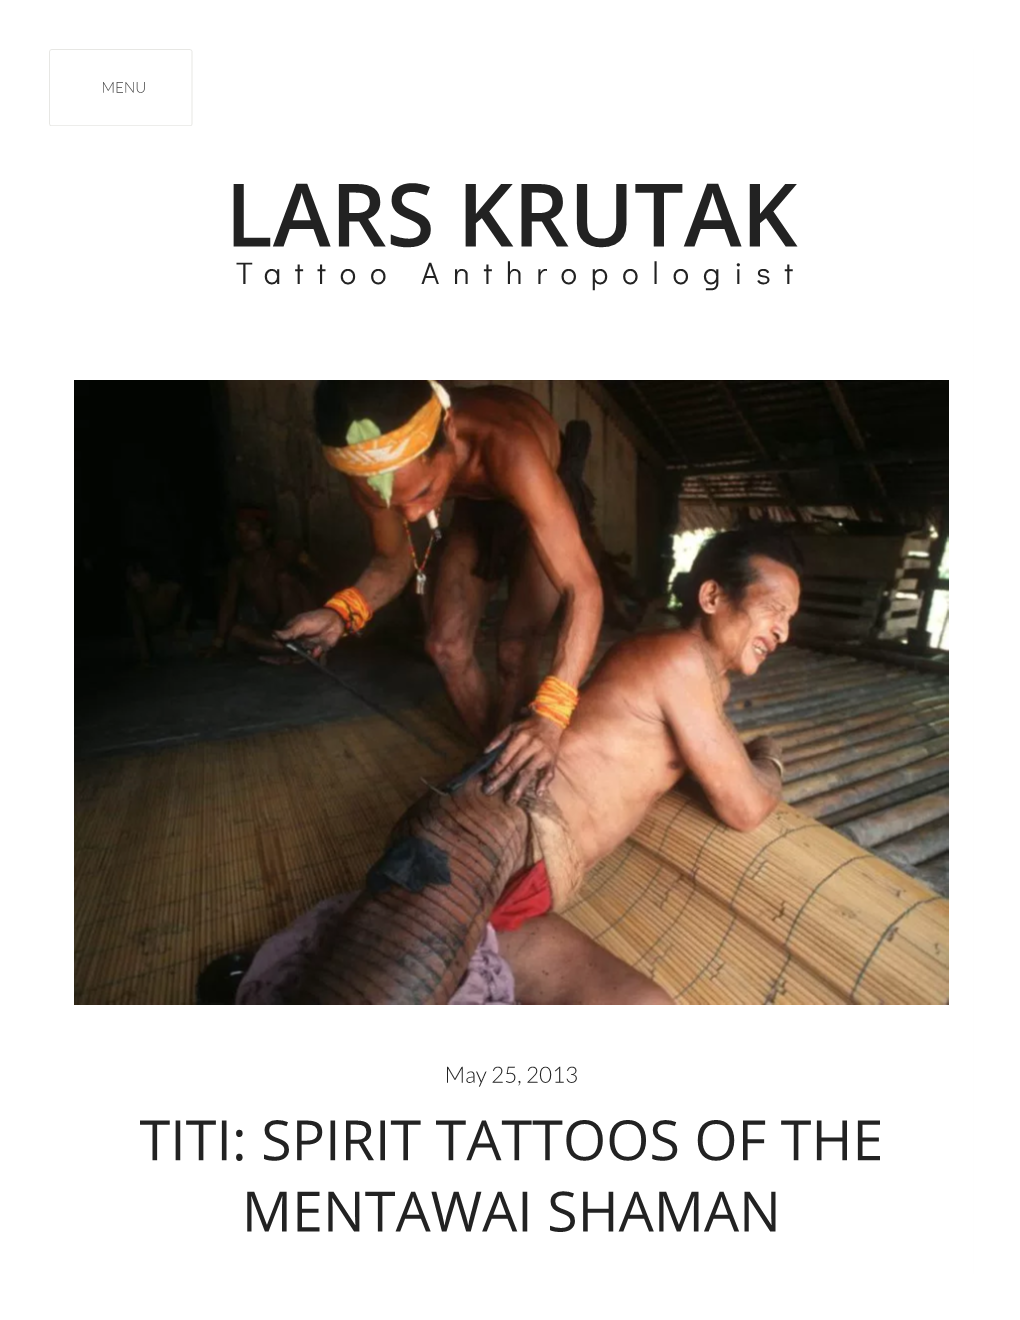 MENTAWAI SHAMAN Article, Magical Tattooing, Traditional Techniques